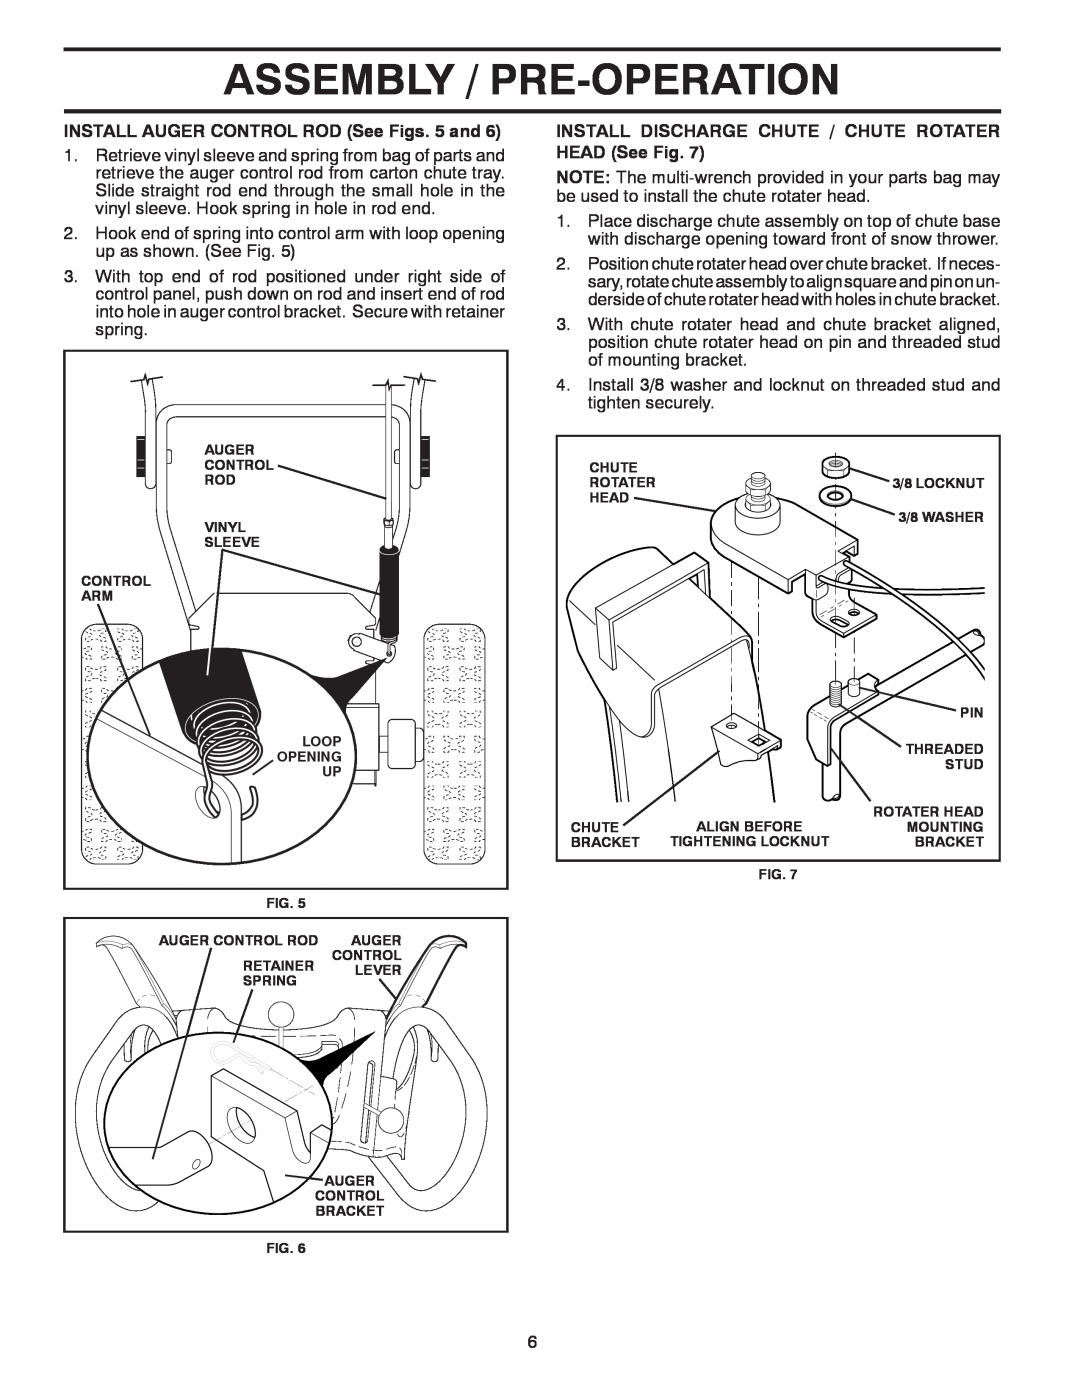 Poulan 429264, 96198003301 owner manual Assembly / Pre-Operation, INSTALL AUGER CONTROL ROD See Figs. 5 and 